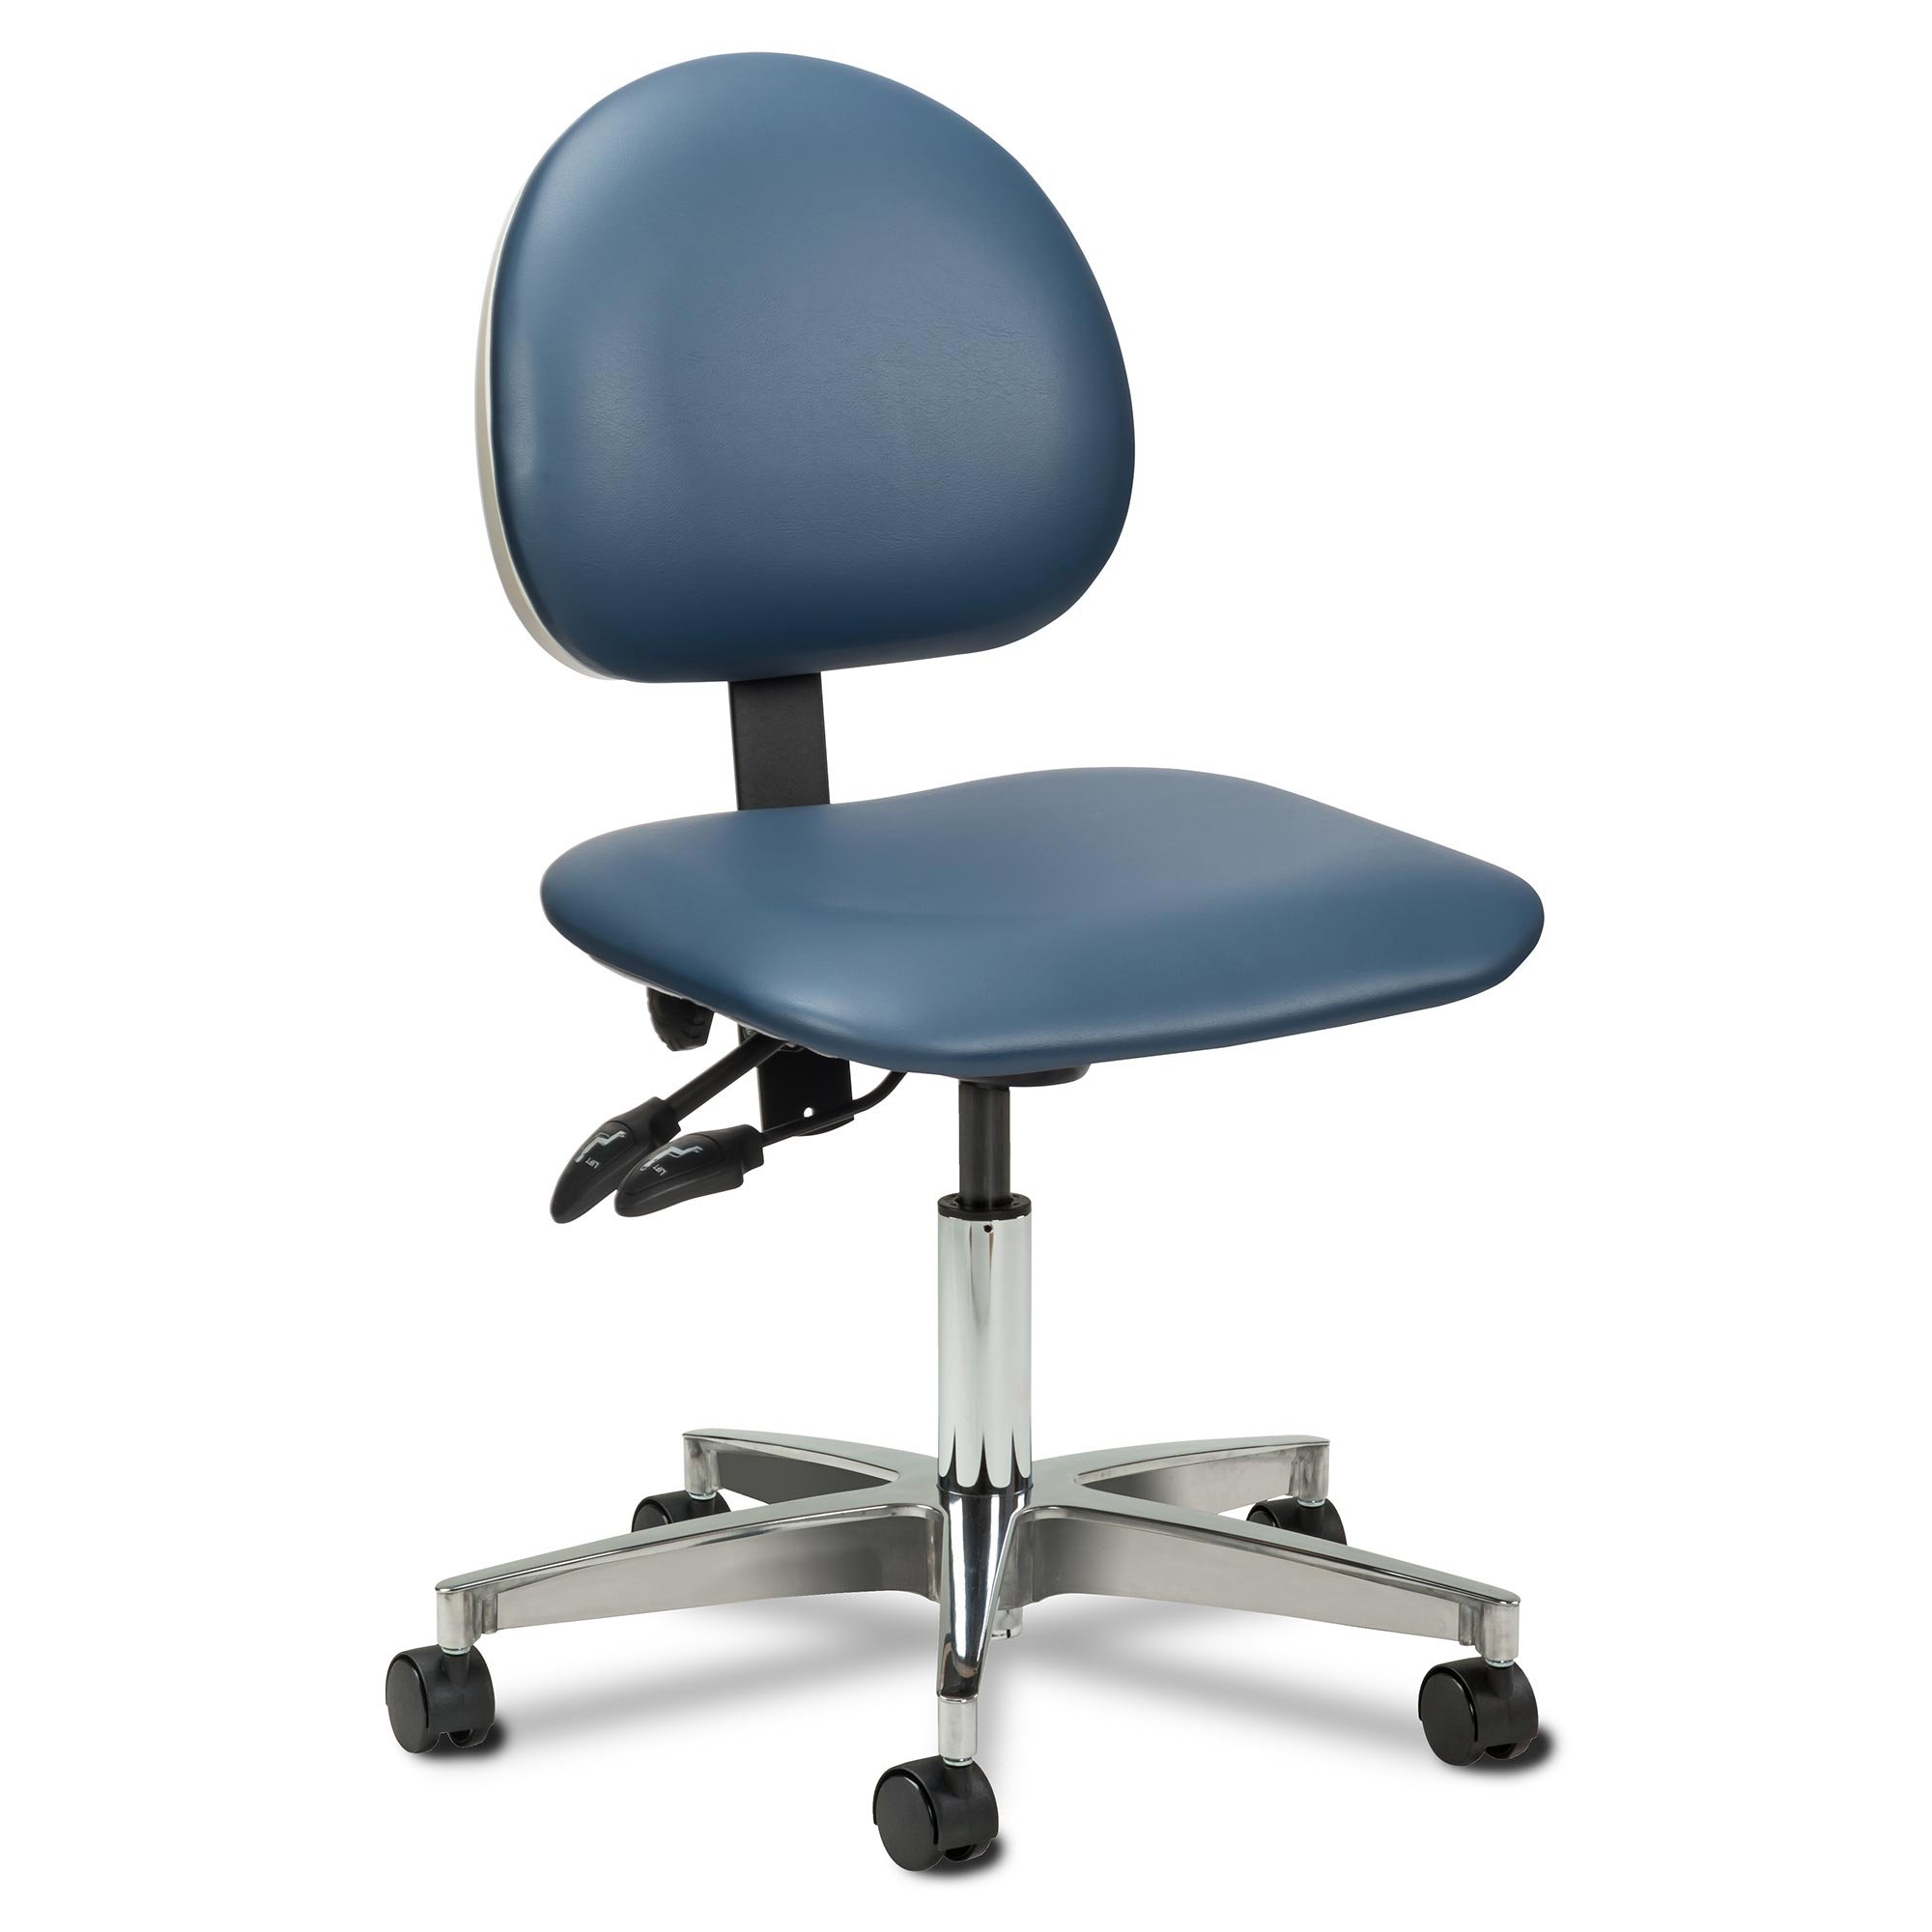 Why Do Office Chairs Usually Have 5 Legs?